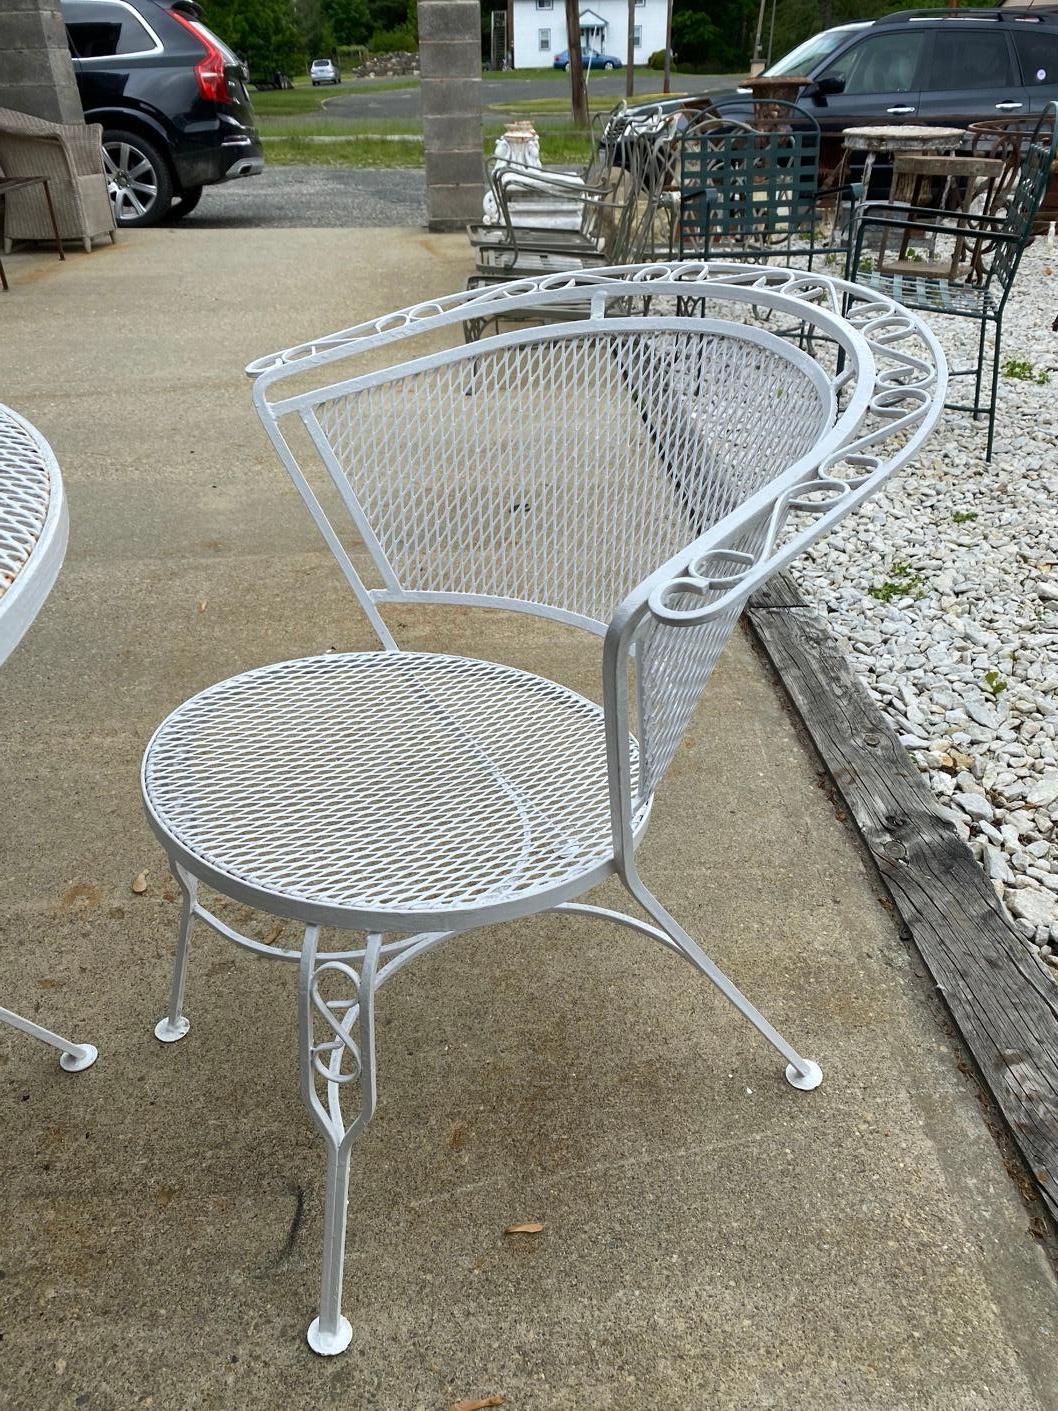 Pair of outdoor garden dining armchairs with Classic diamond mesh wire seat and back. The armchairs are very comfortable with a curved barrel back. The set is painted white ready to be used in any patio, porch or garden. Vintage Woodard style for